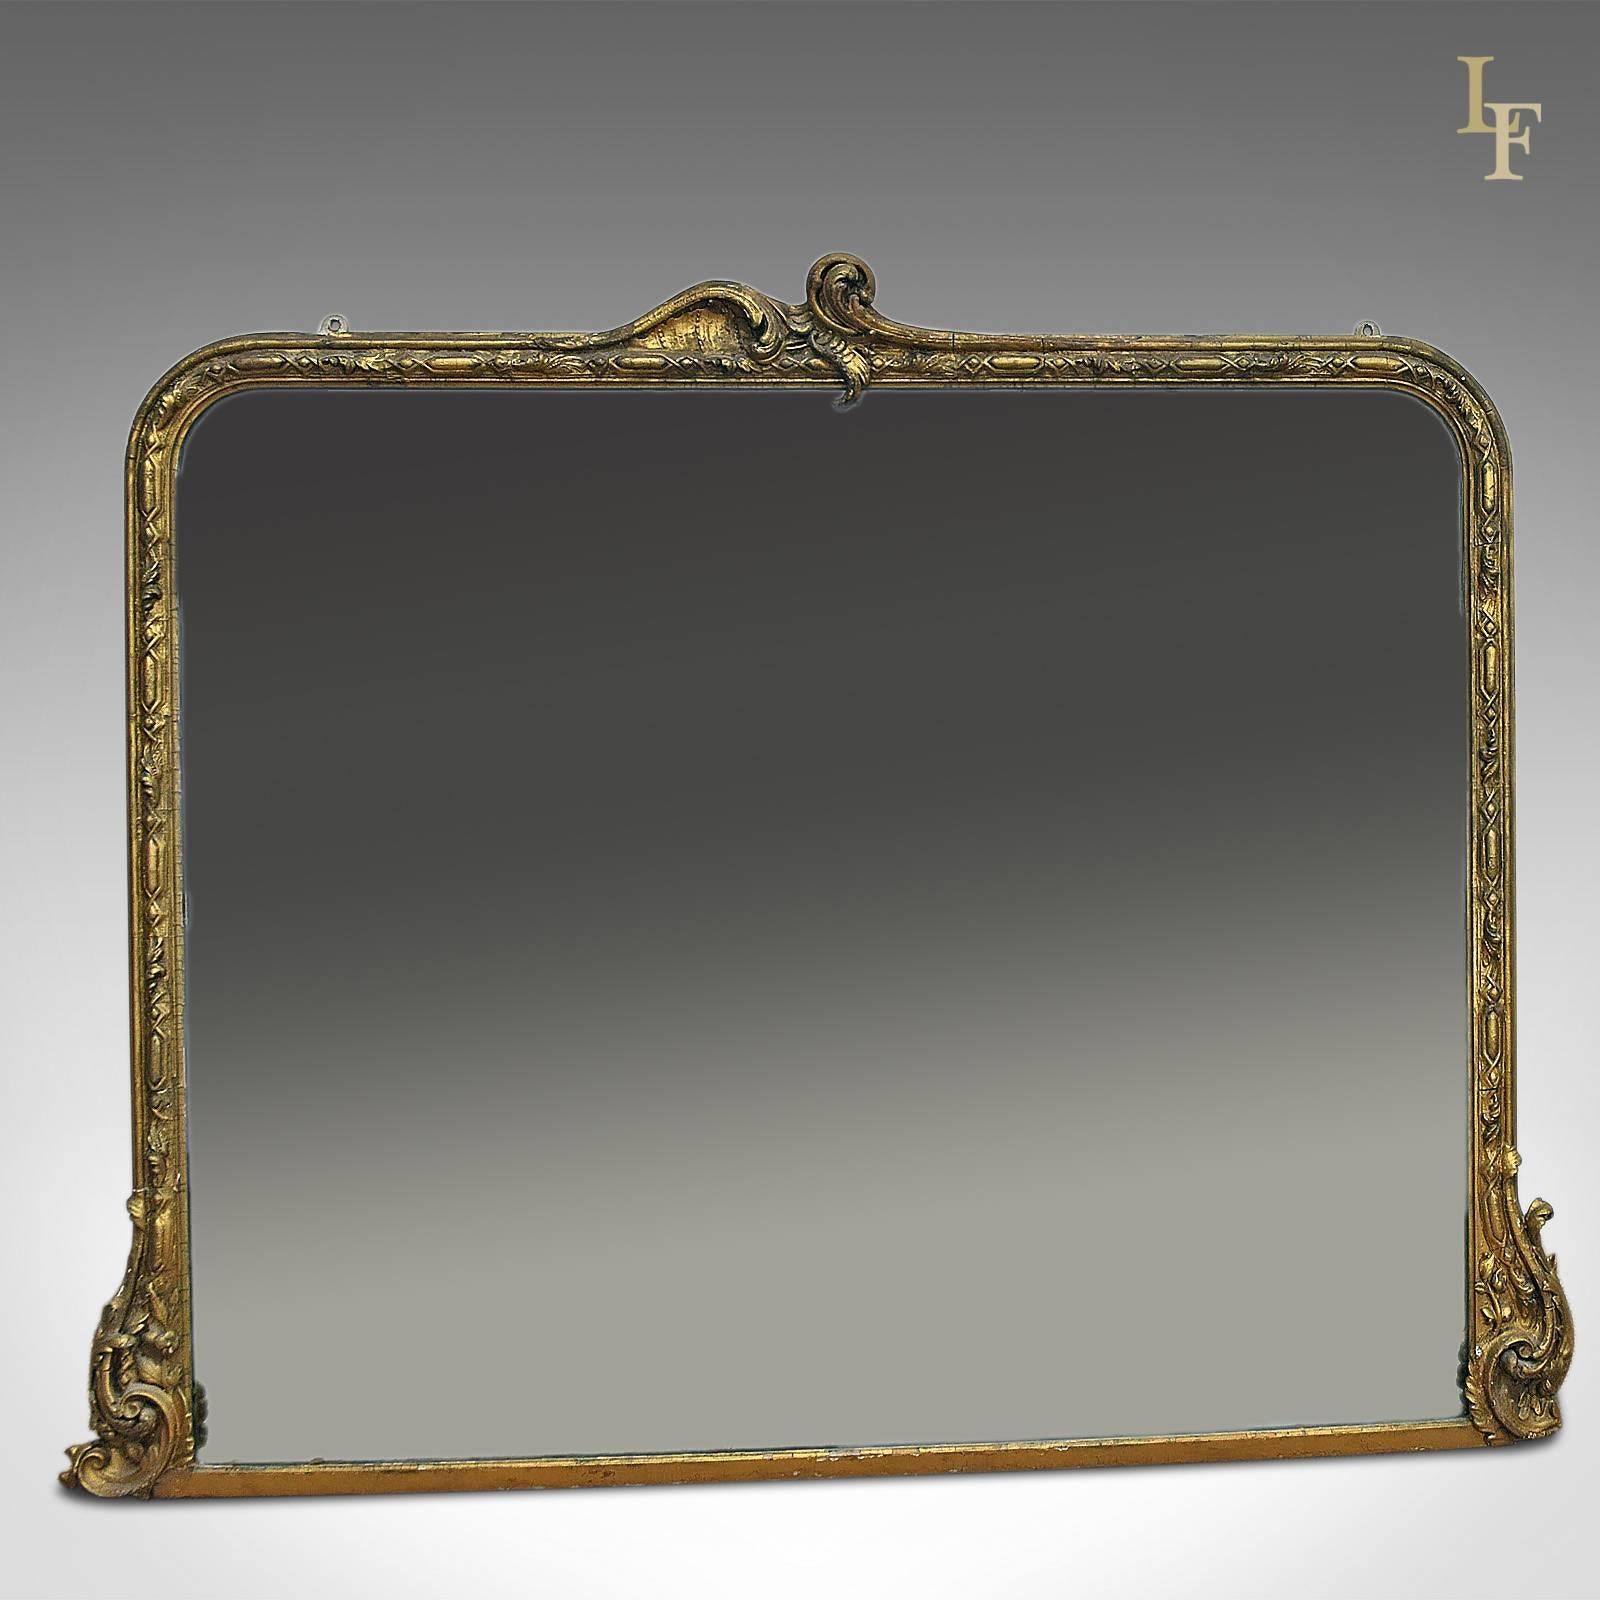 This is an antique overmantel mirror dating to the mid-Victorian period, circa 1860.
Victorian overmantel mirror in a Rococo style

Giltwood and gesso
Large original mirror plate
Ornate moulding details
Original panel back
Mounting lugs ready